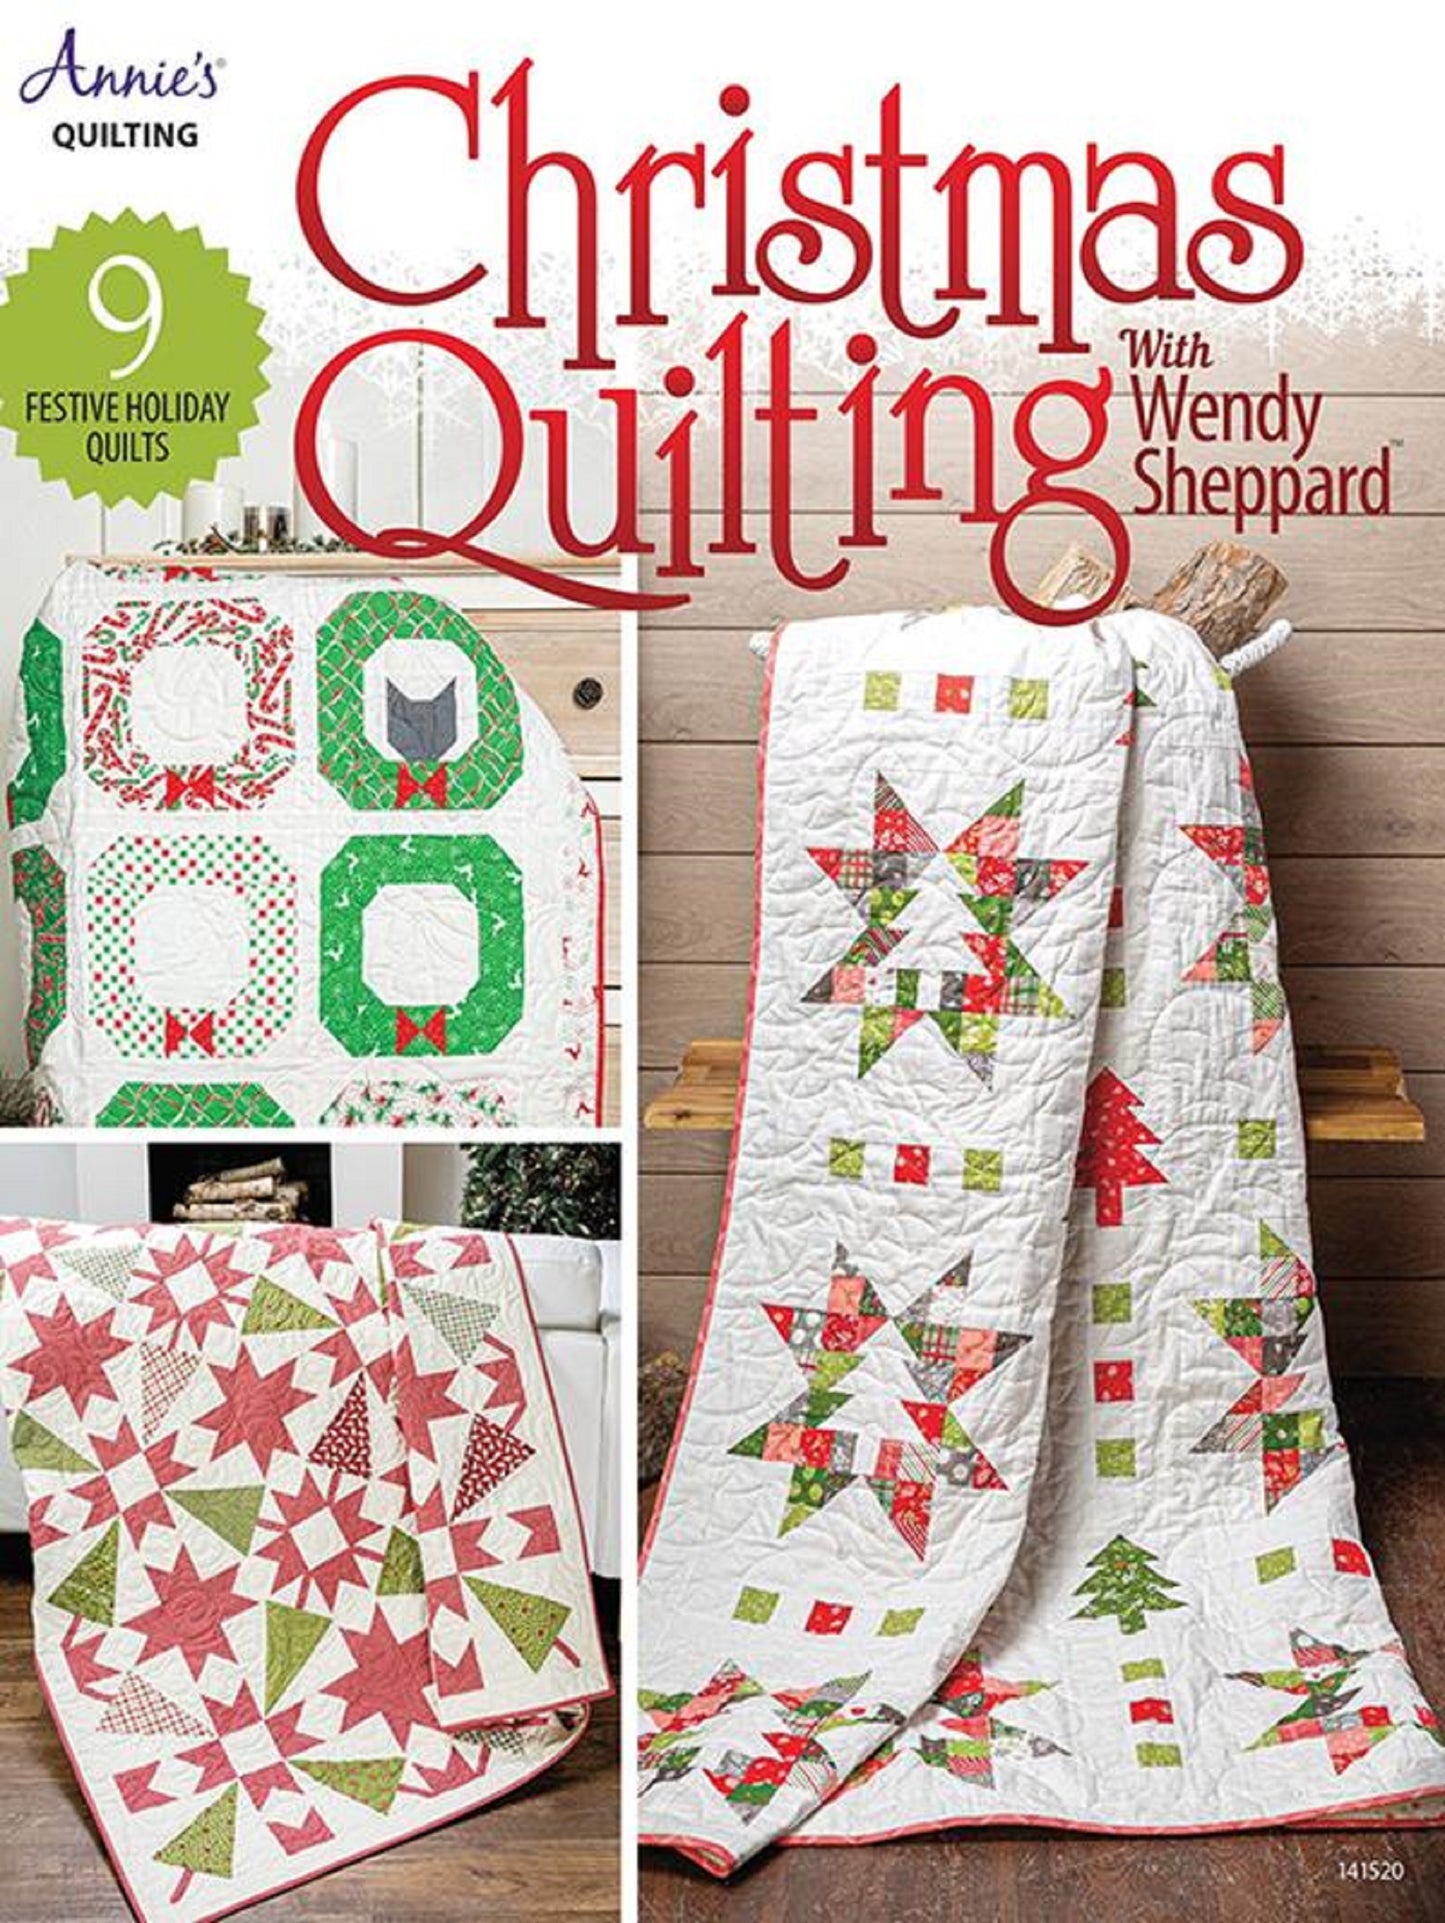 Christmas Quilting Book W/Wendy Sheppard-Annie's Quilting